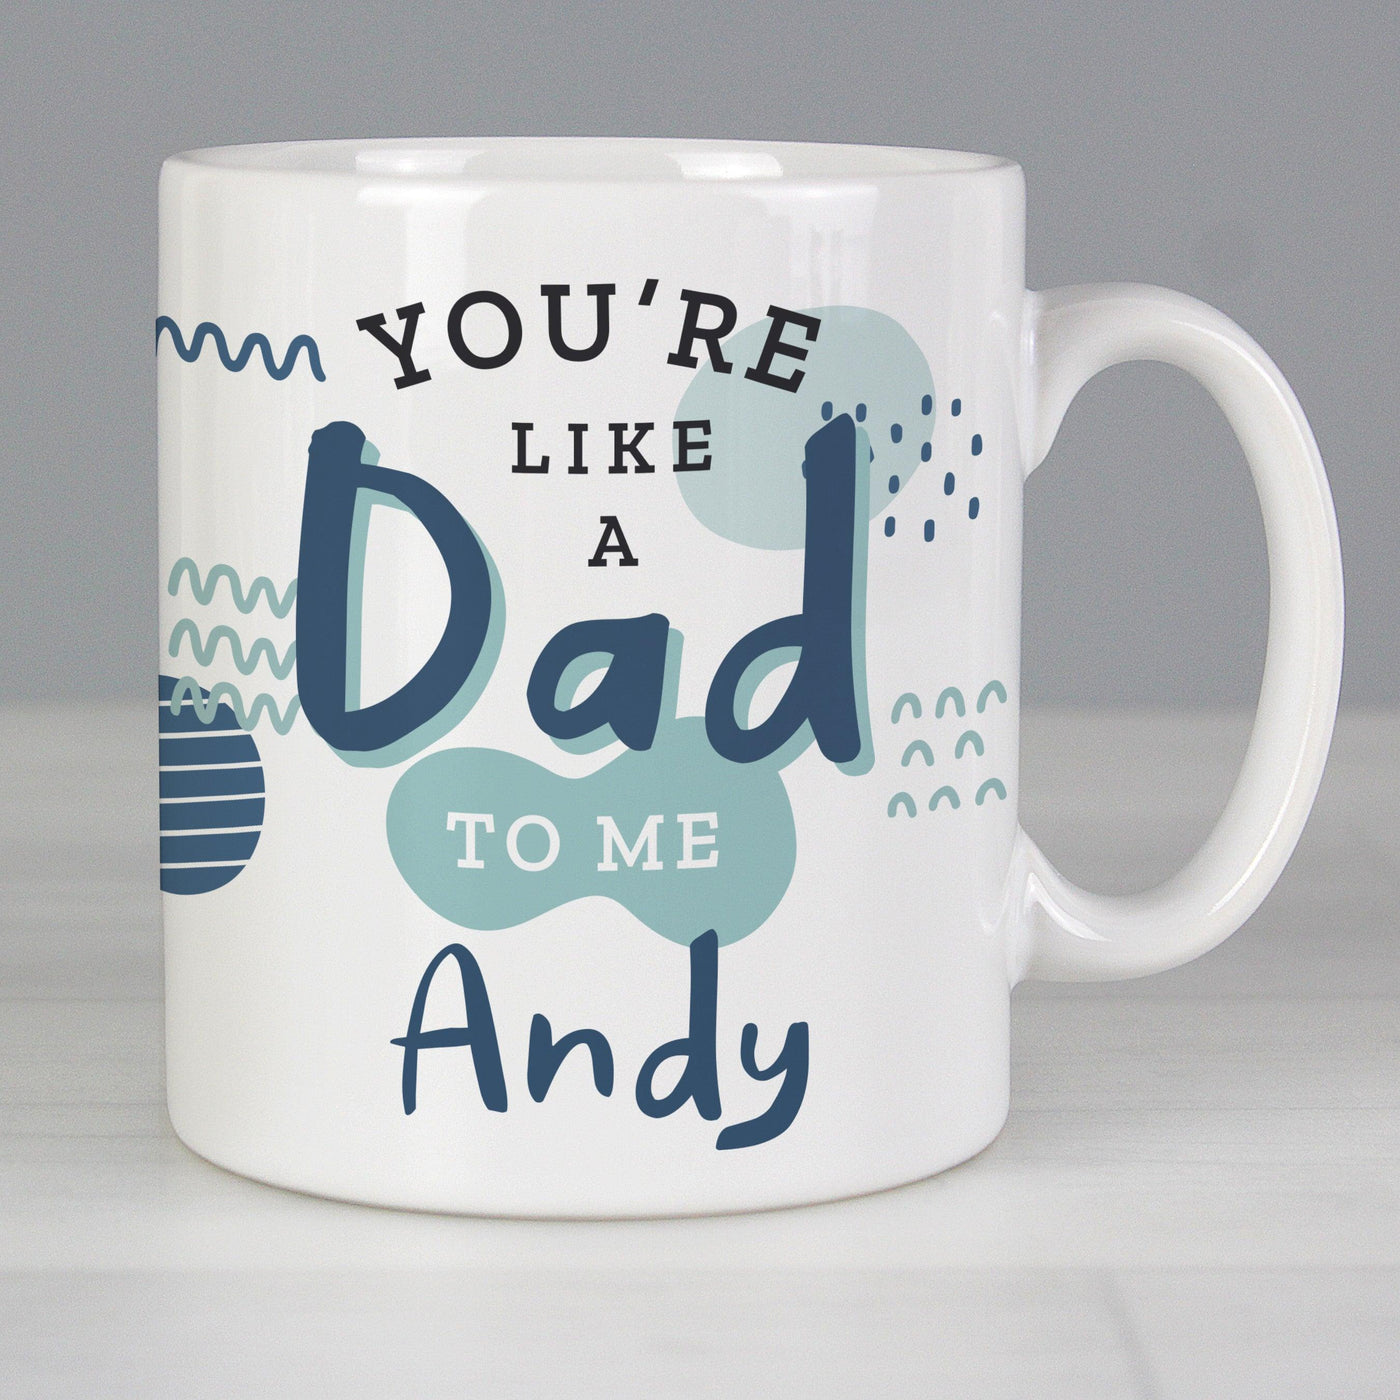 Personalised Like A Dad To Me Ceramic Mug - Shop Personalised Gifts